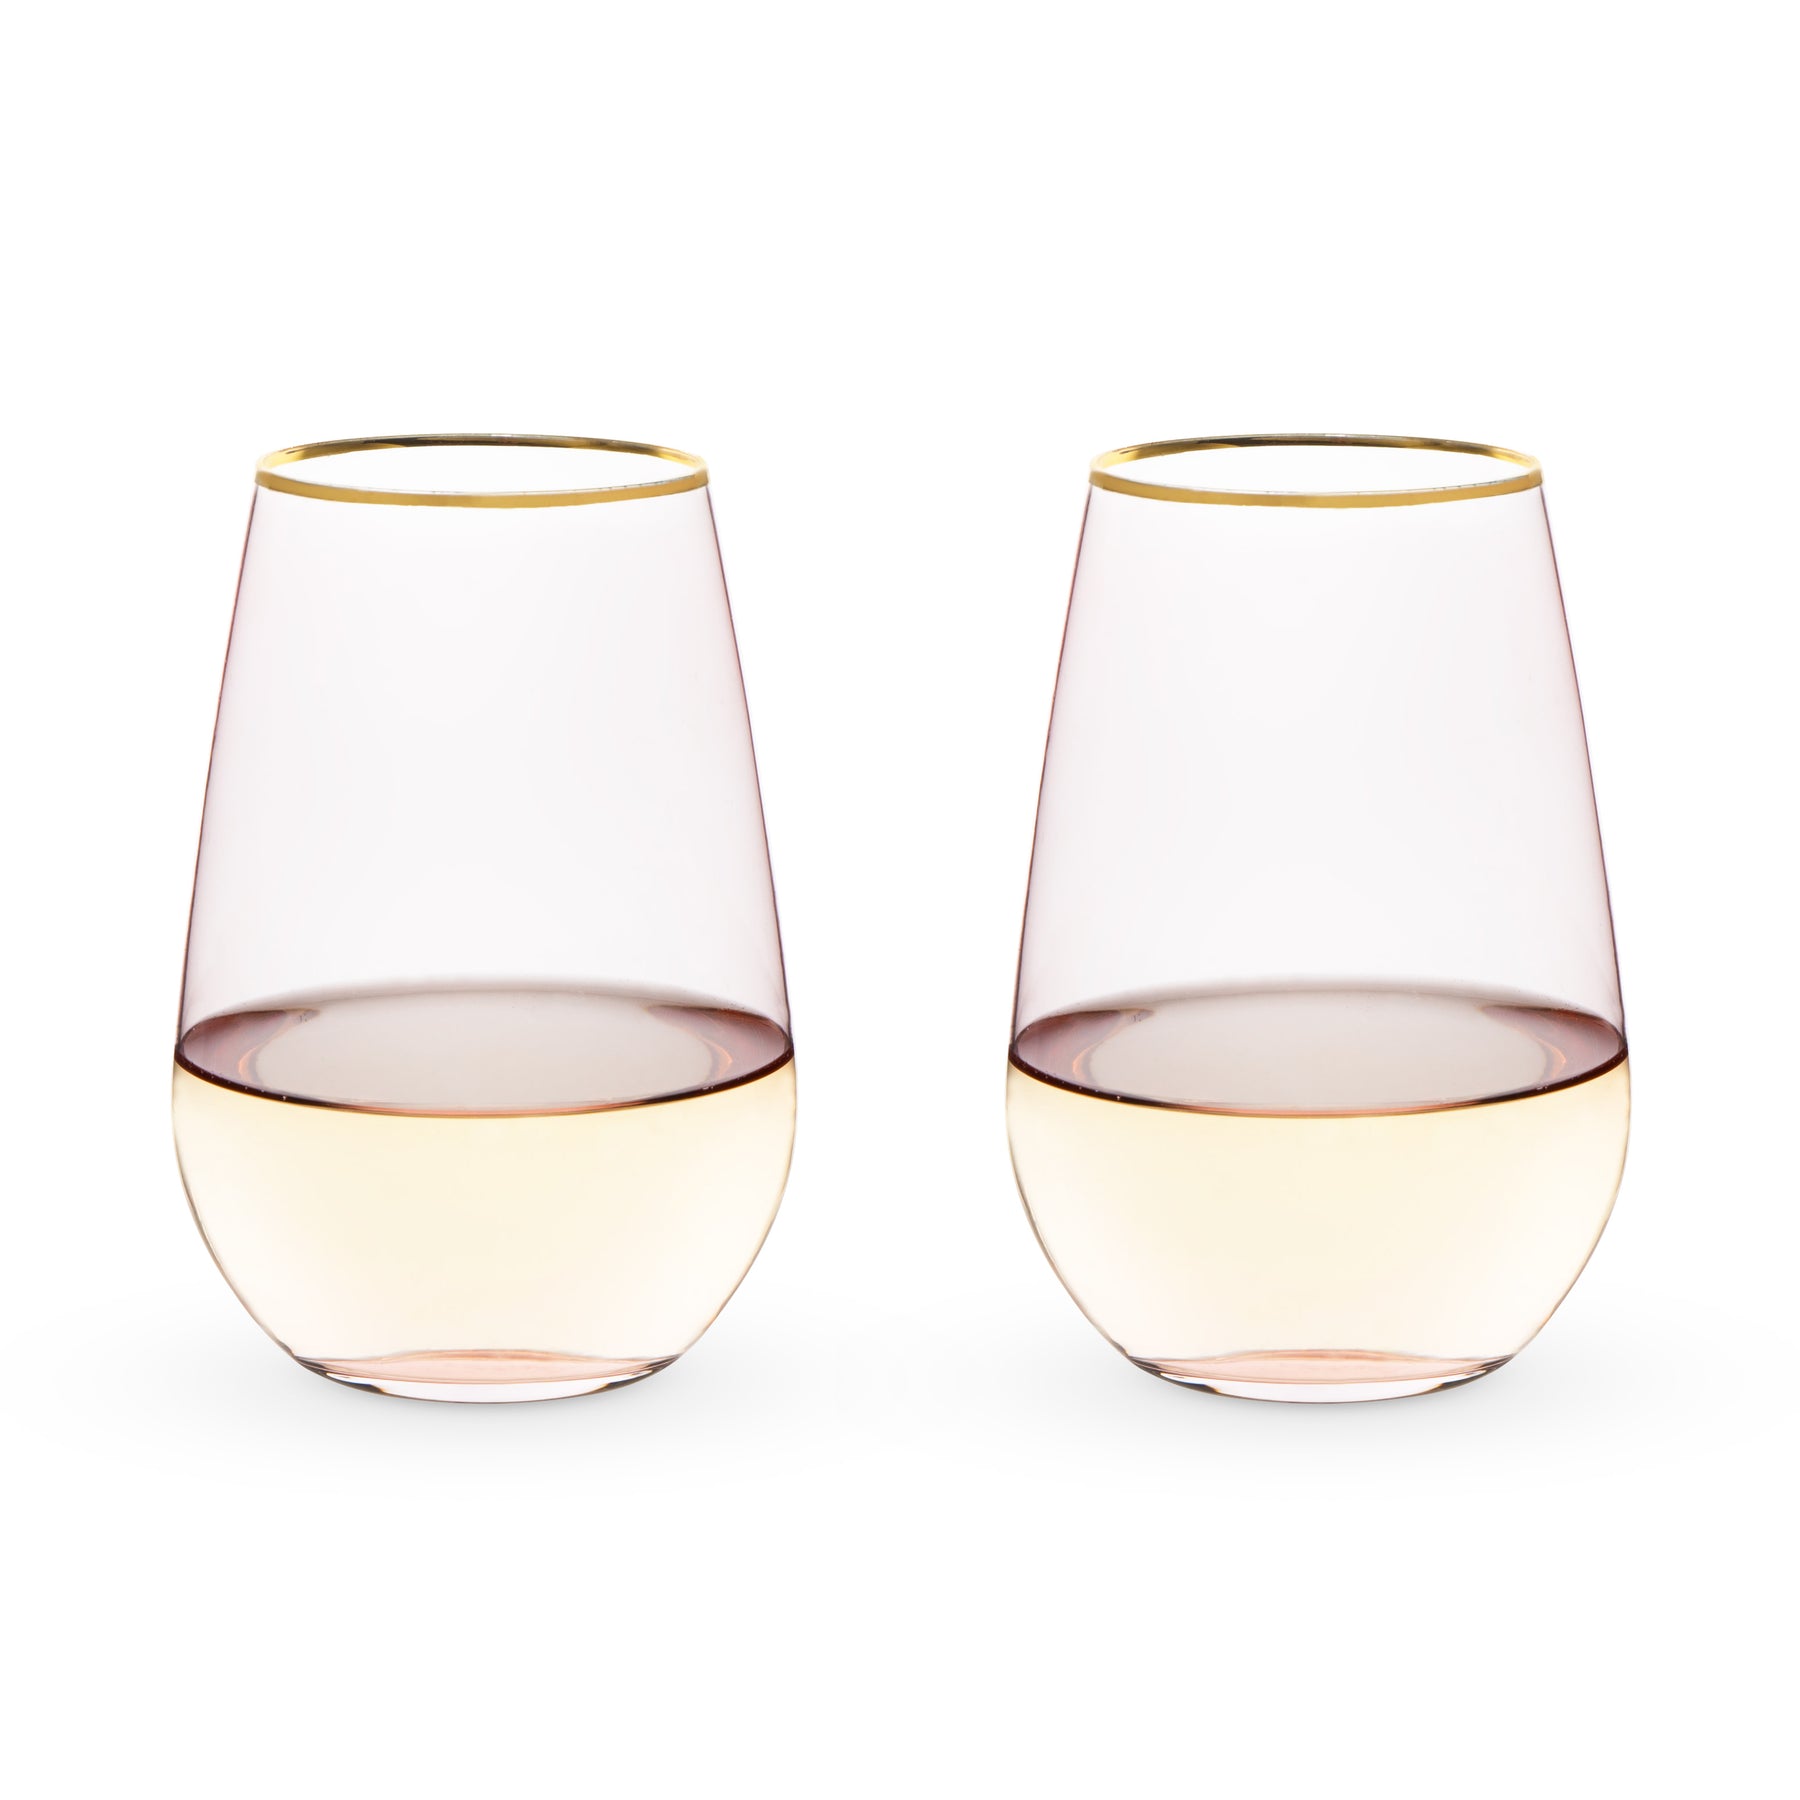 New Cute Flora Gold Live in the Moment Stemless Wine Glass by